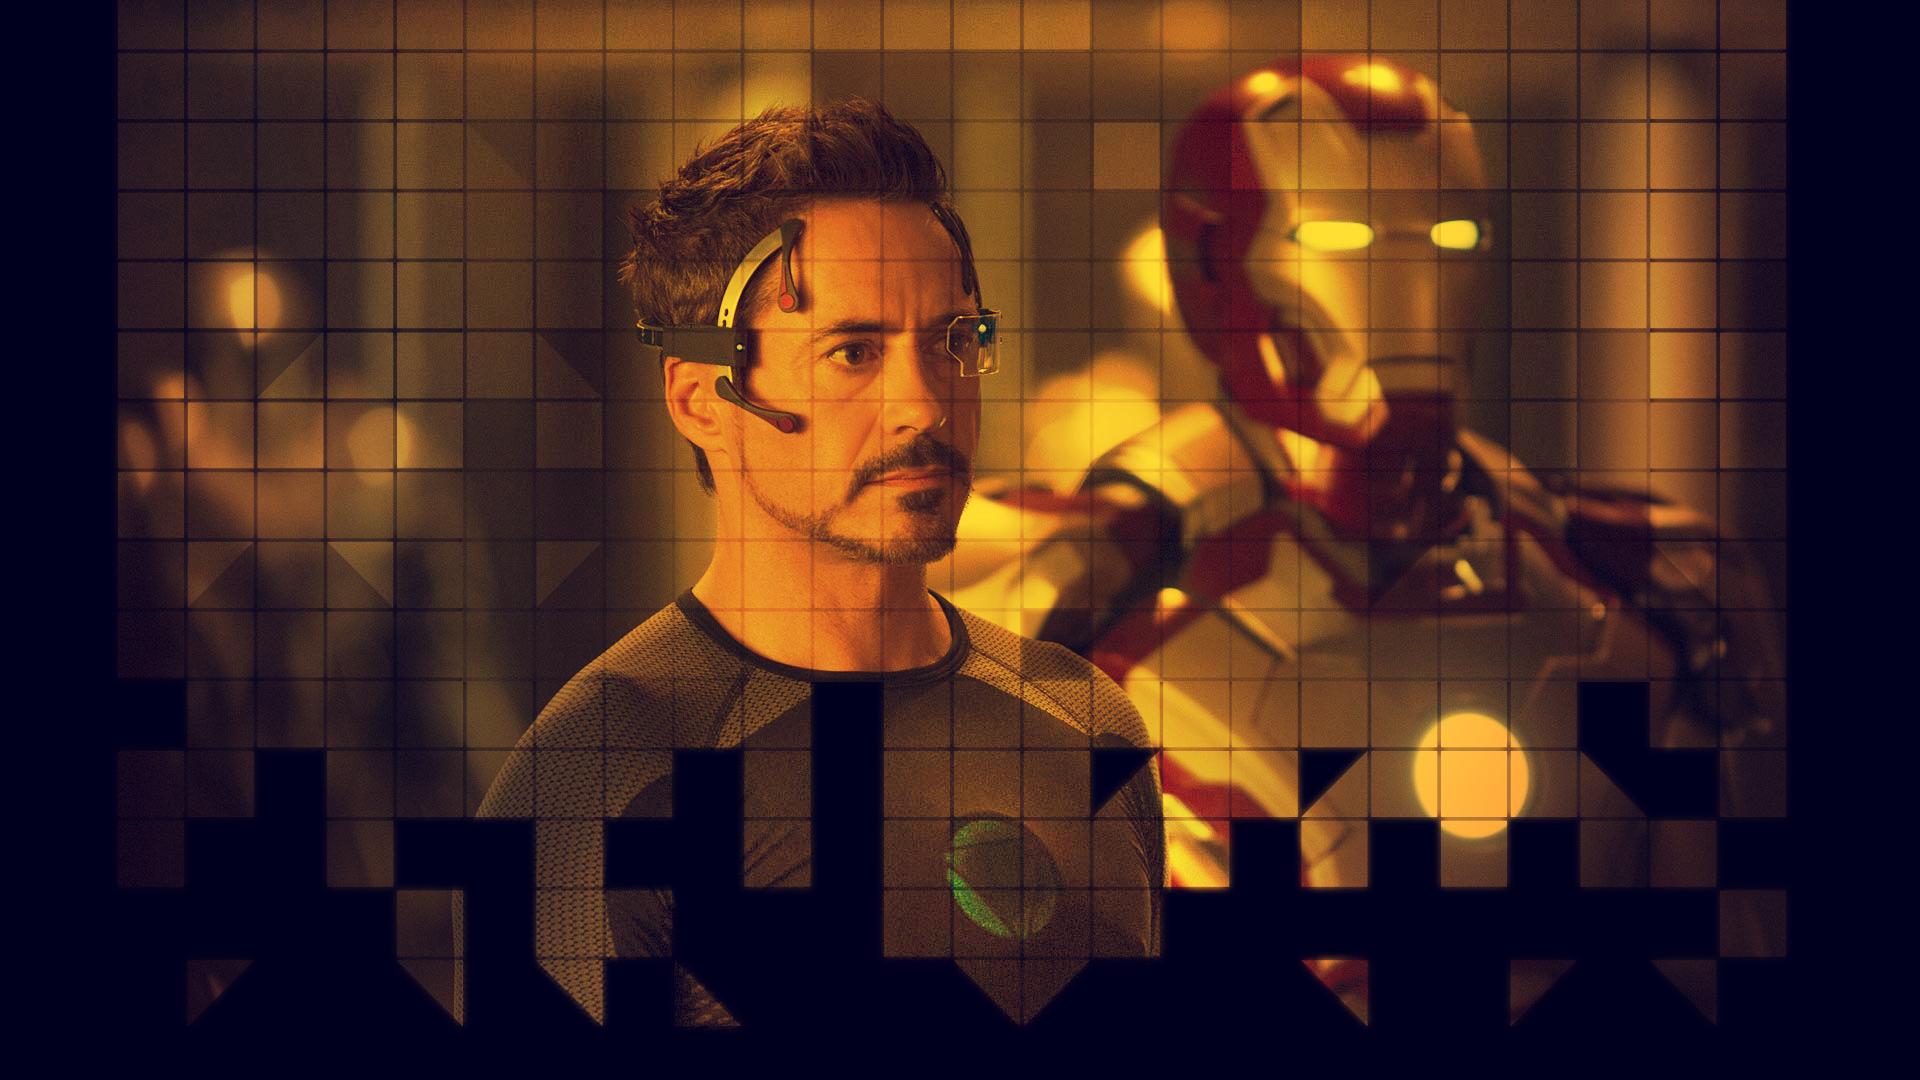 Iron Man 3 download the last version for iphone